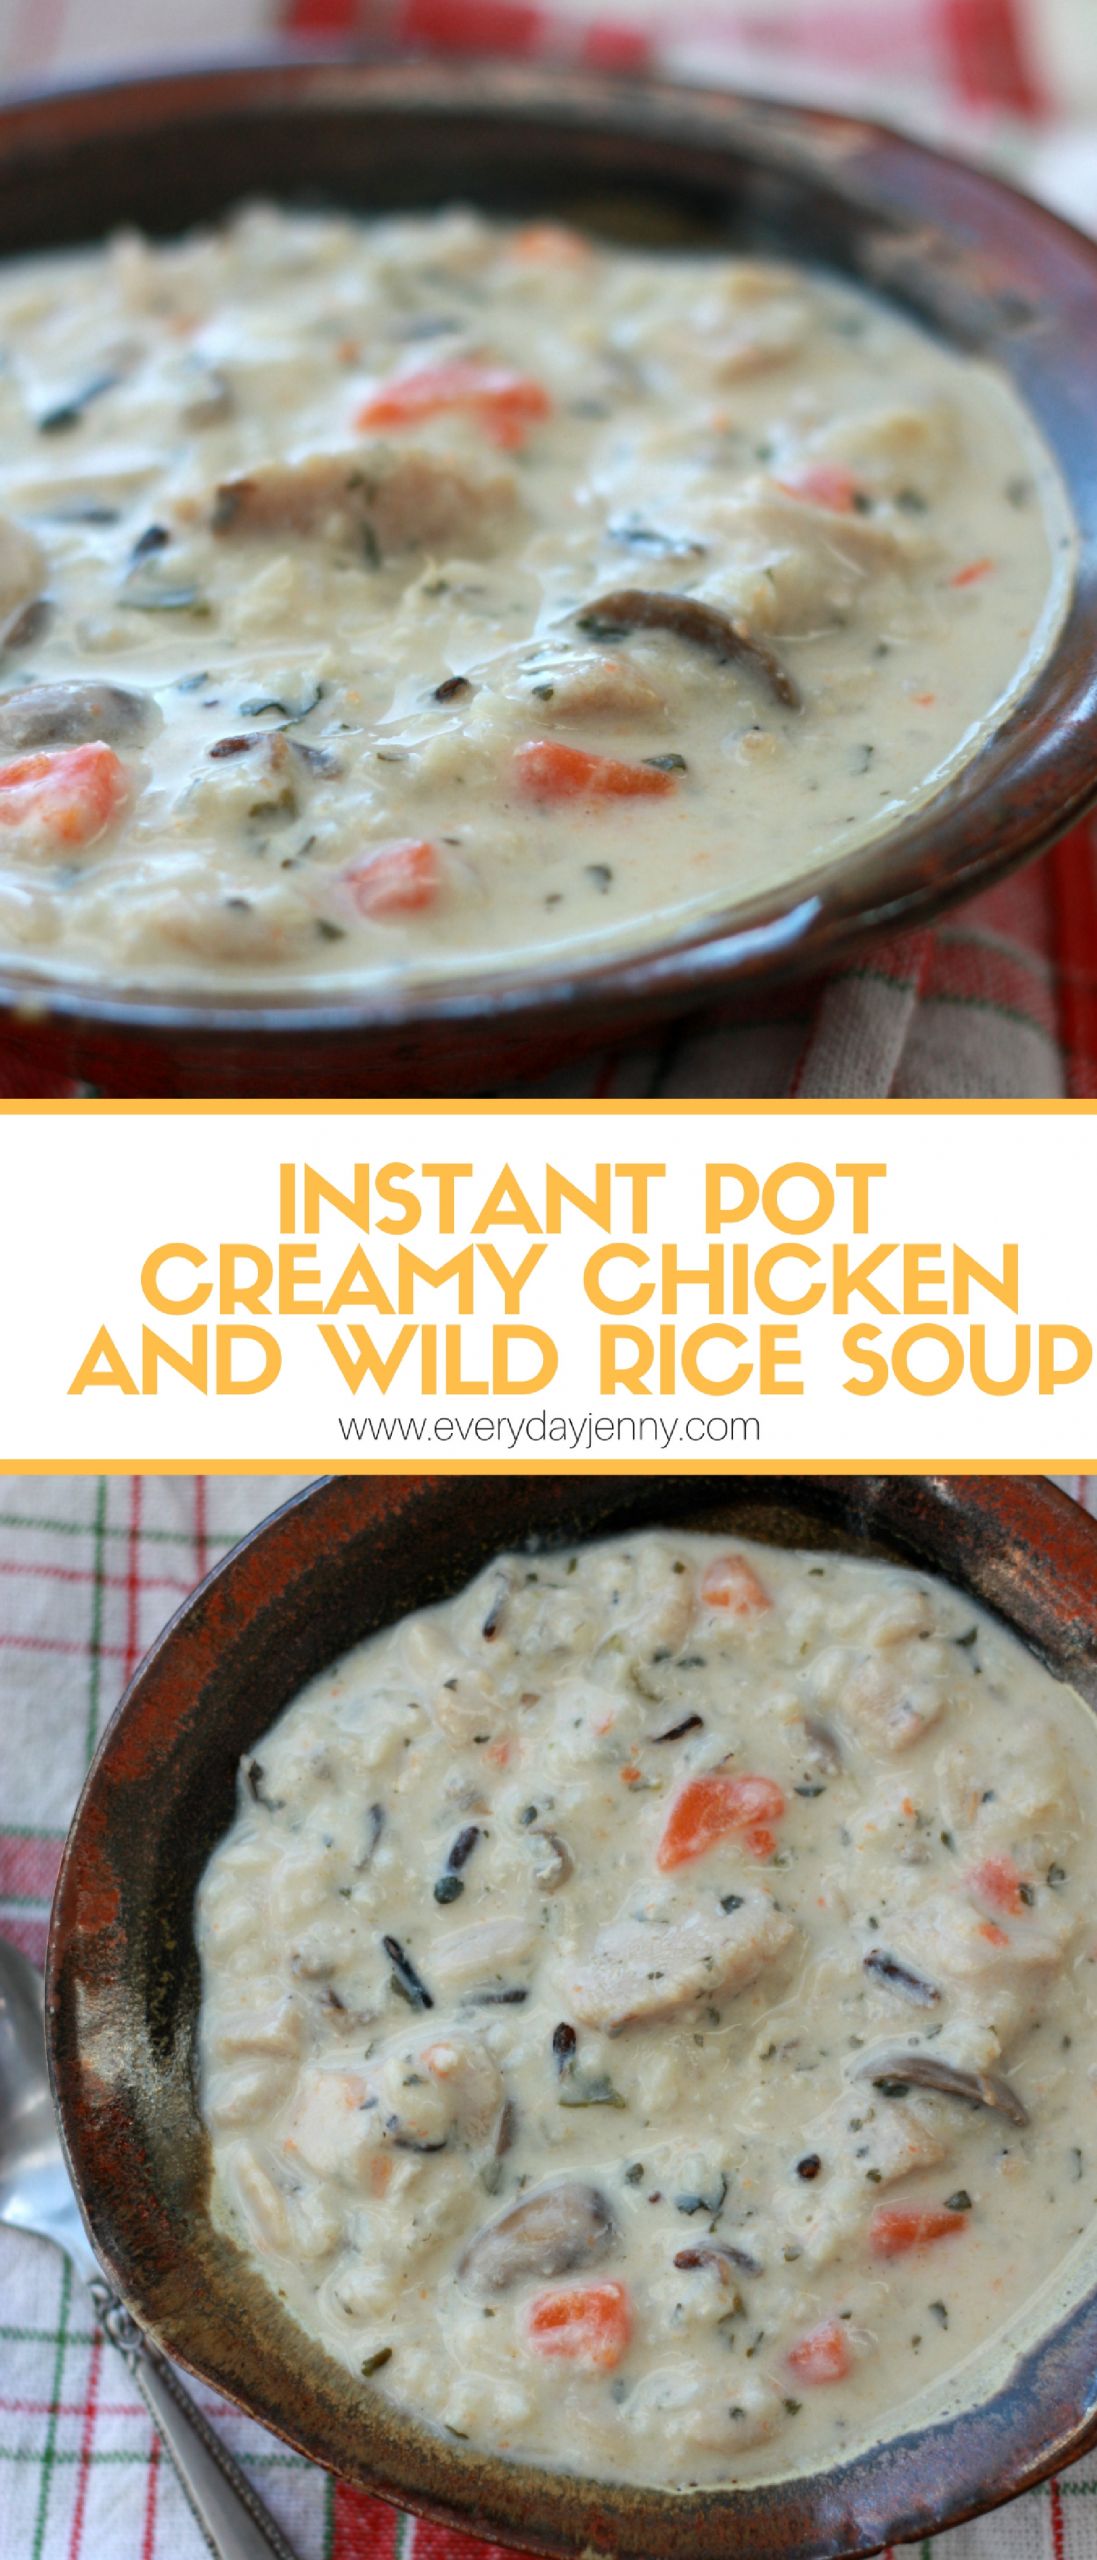 Cream Of Chicken And Rice Soup
 INSTANT POT CREAMY CHICKEN AND WILD RICE SOUP